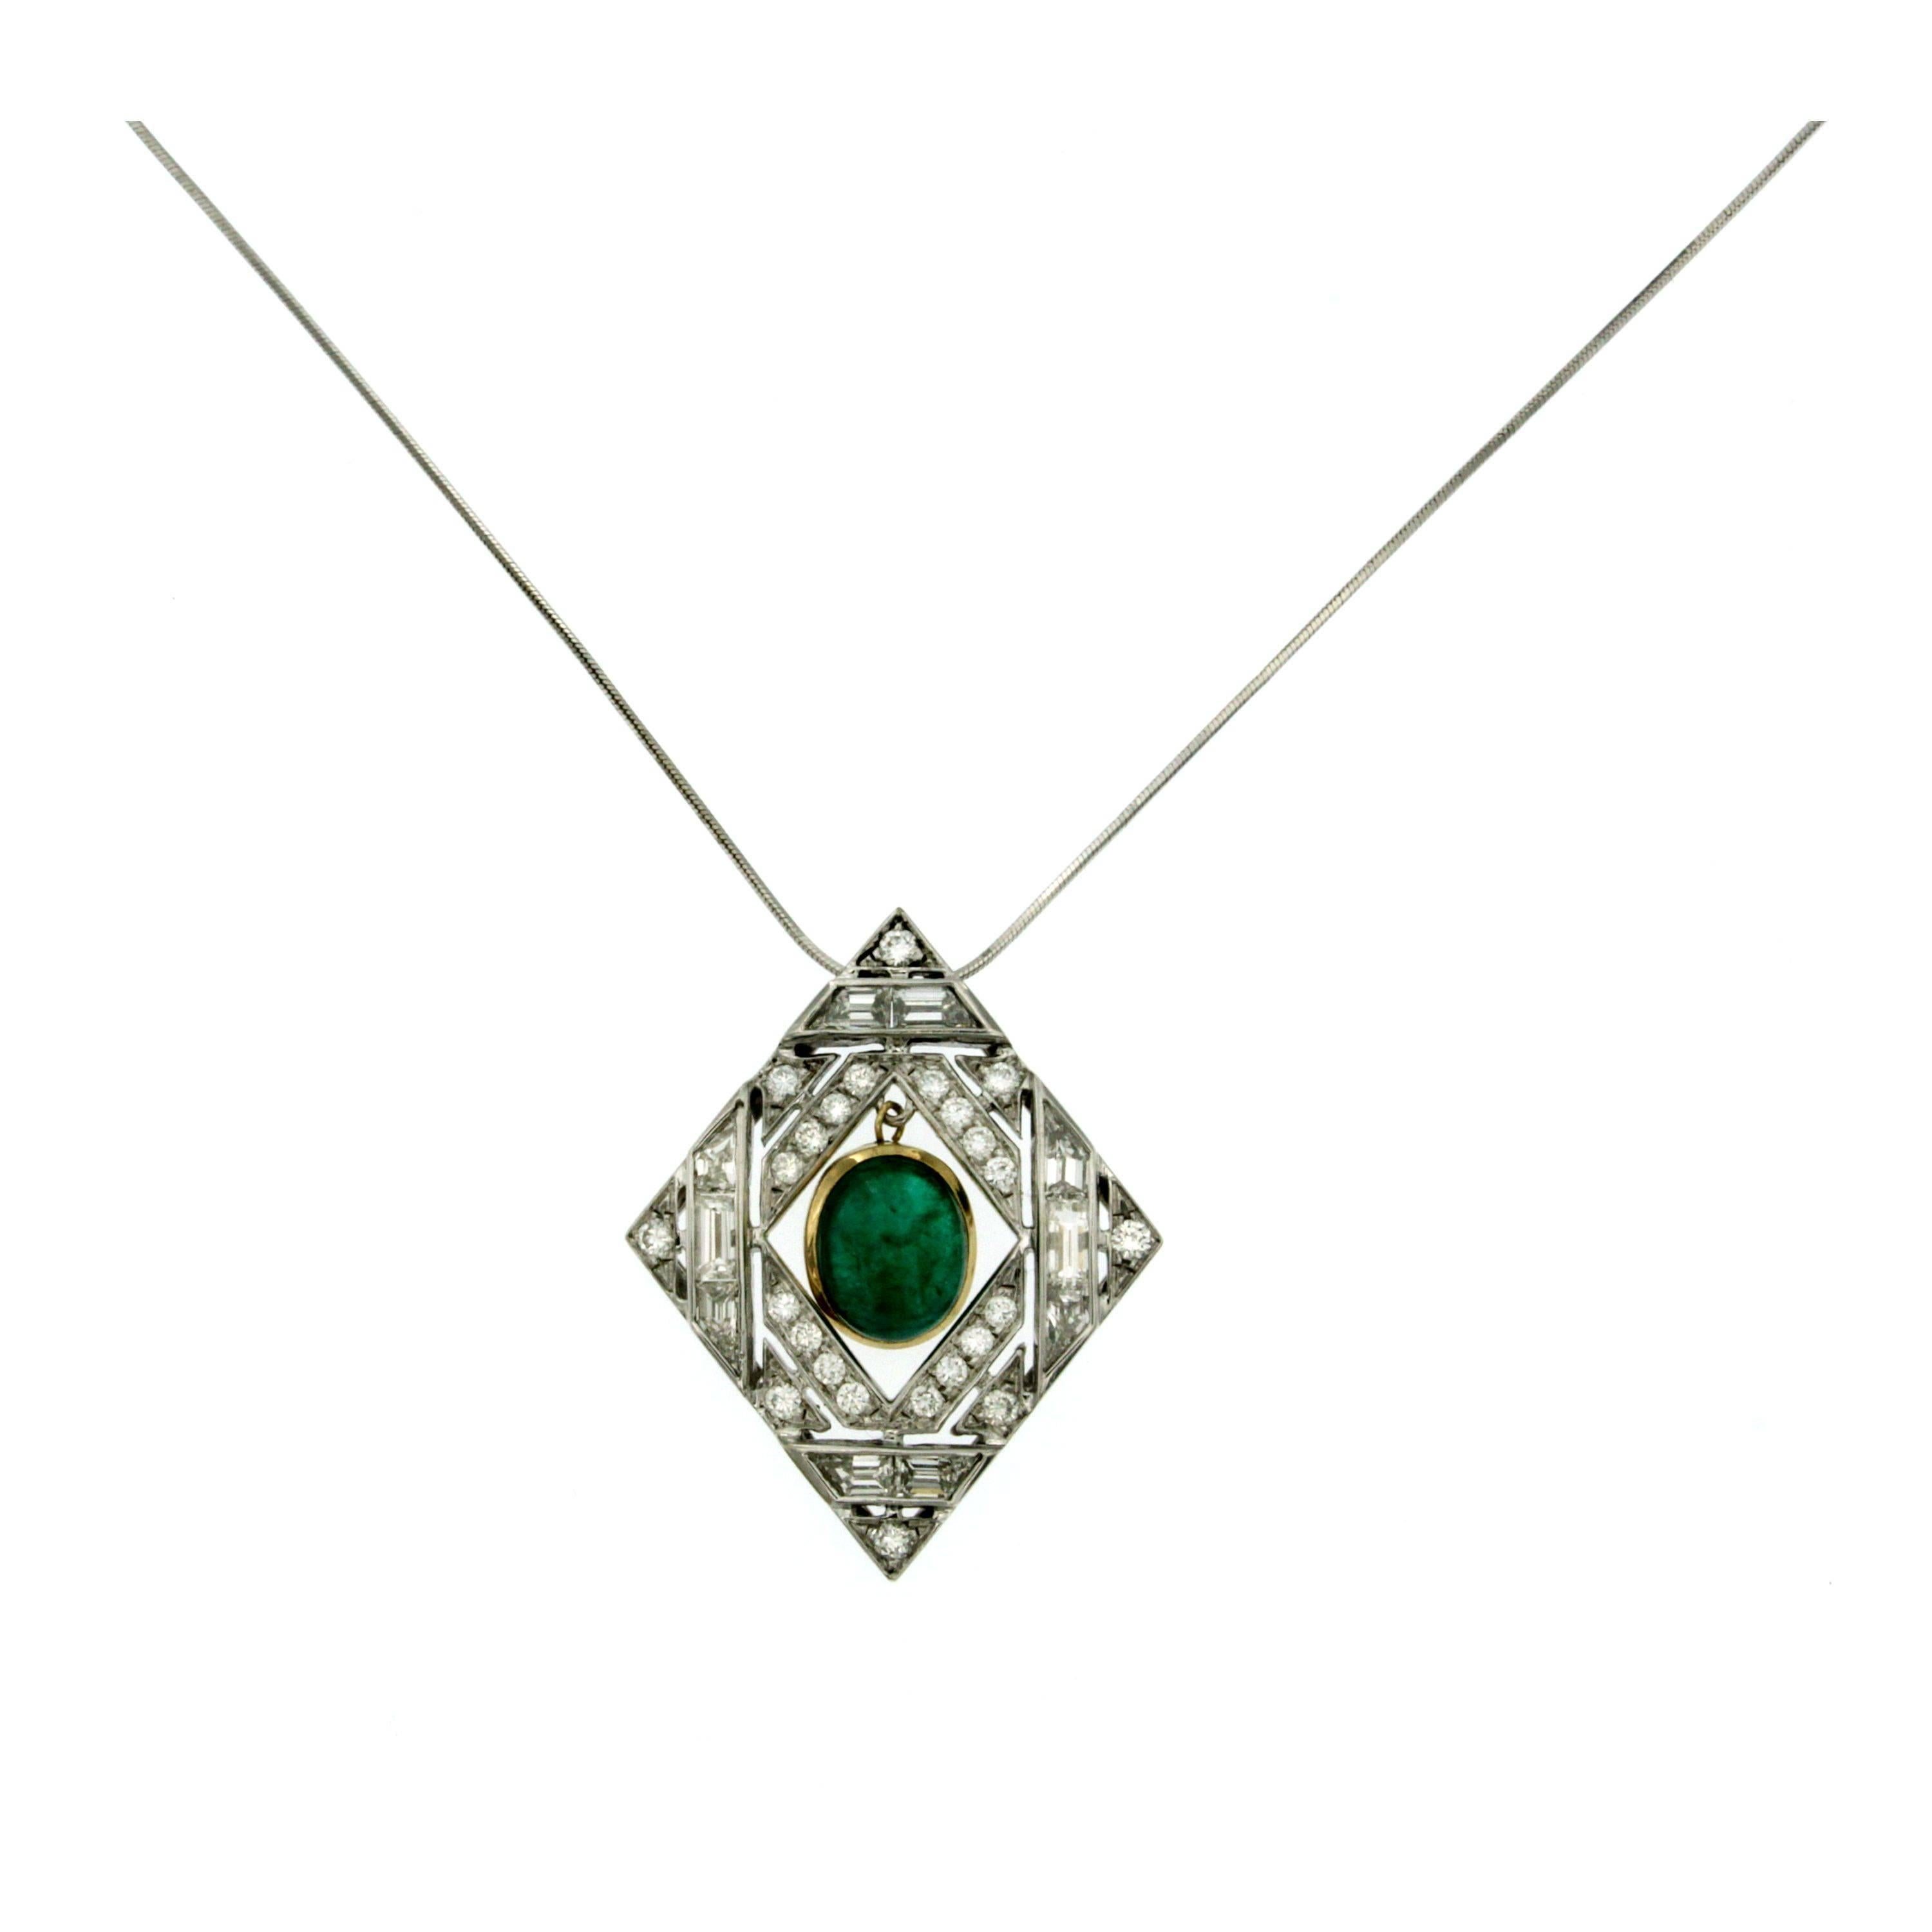 18K White gold Emerald and Diamond pendant.
The pendant is prong set with an approximately 2.50 carat cabochon natural emerald, beautiful medium to deep green color, surrounded by round brilliant and baguette cut diamonds totaling approx 2.70 cts